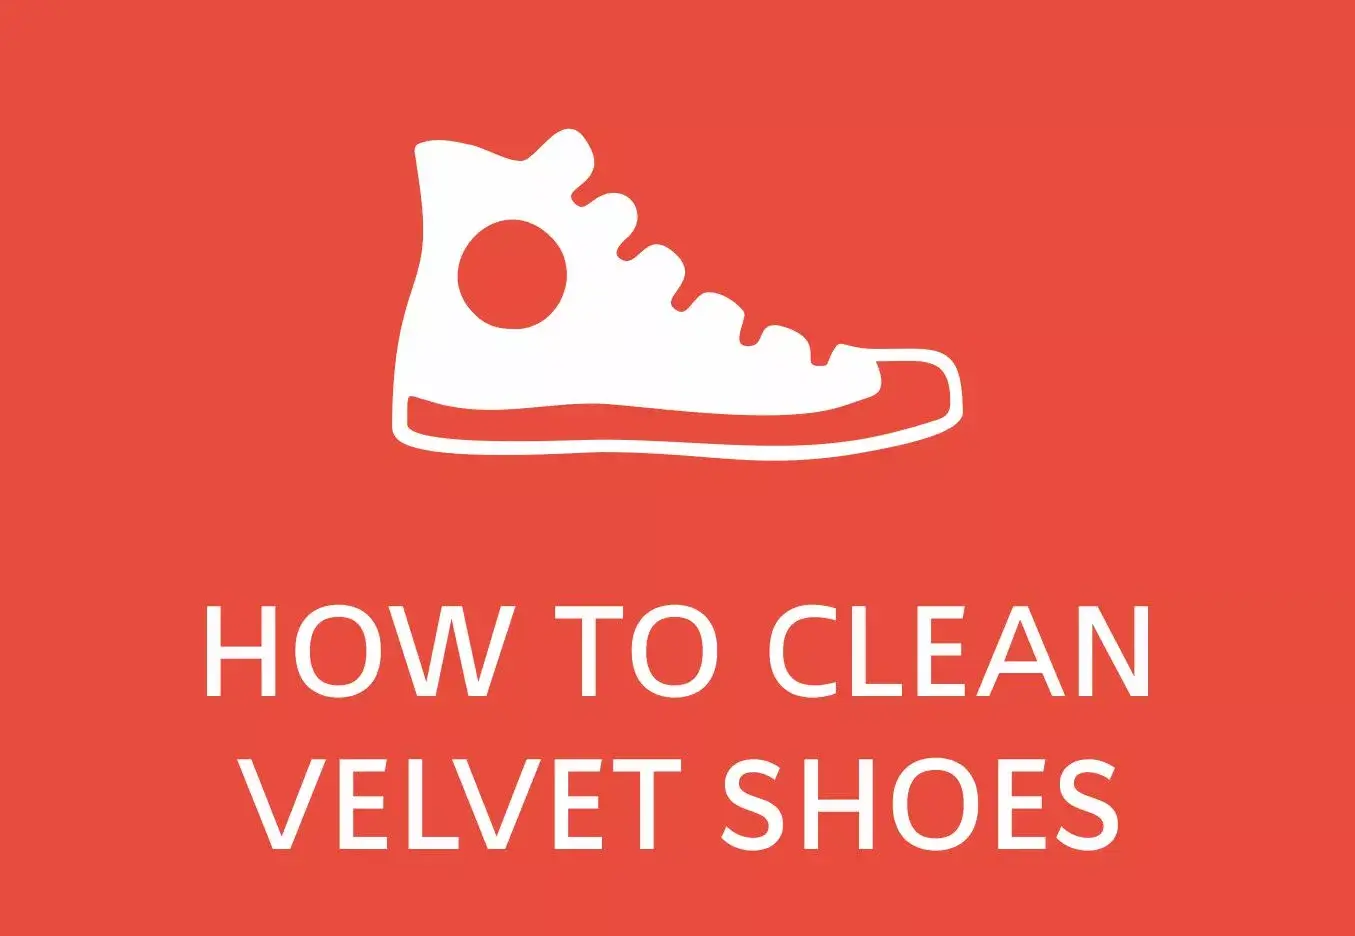 How to clean velvet shoes | Easy cleaning guide